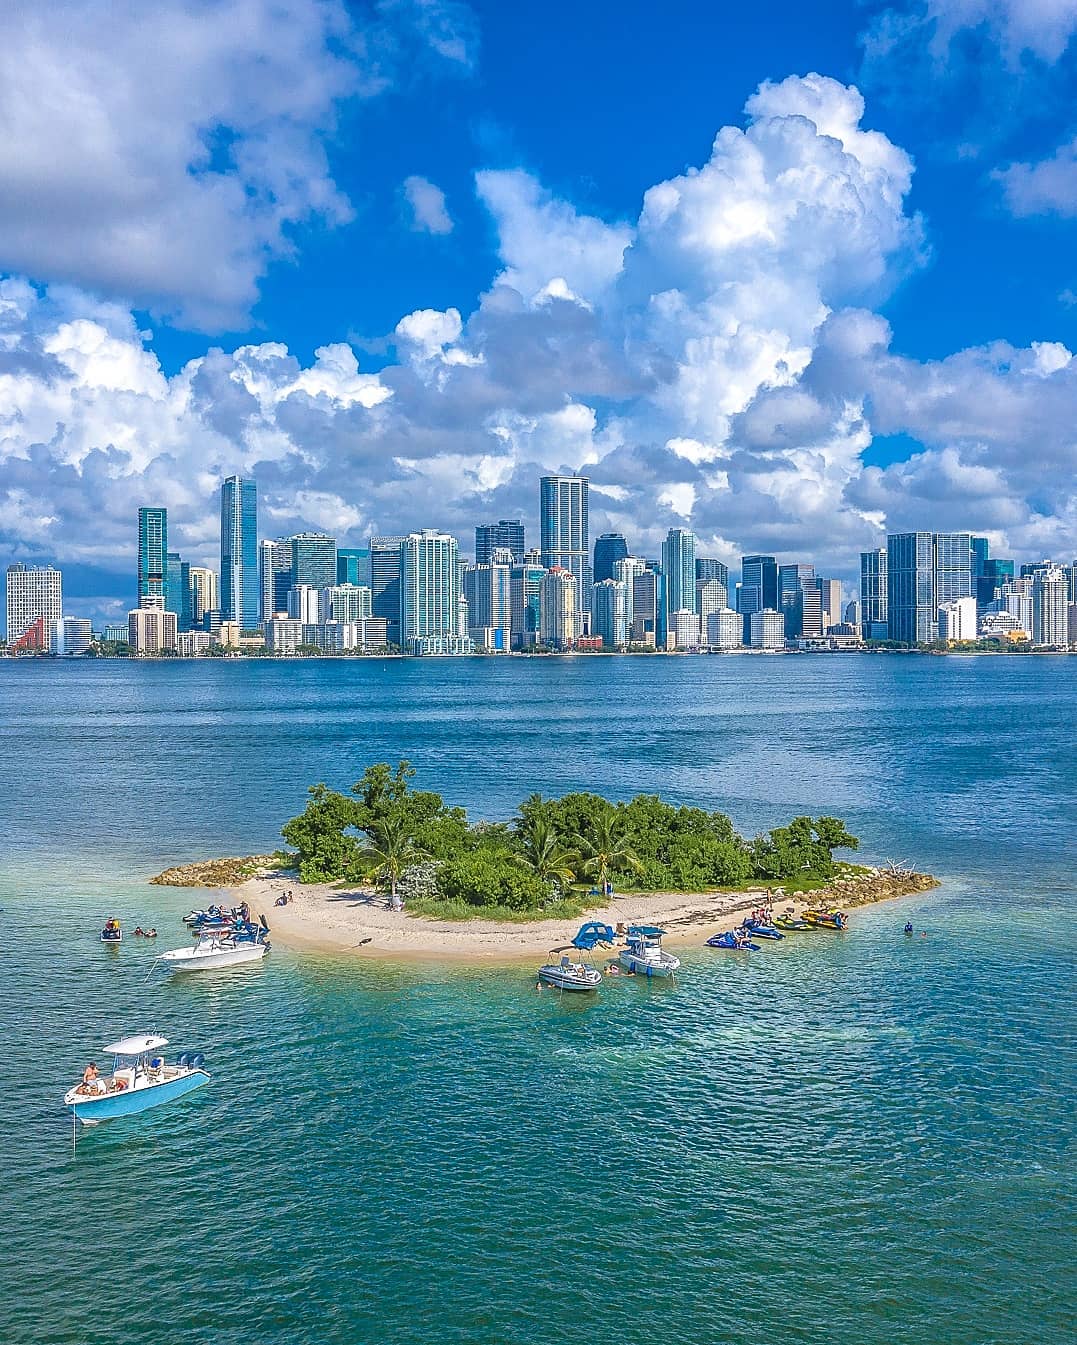 View of Downtown Miami, FL from the Ocean. Photo by Instagram user @remotepilotmike